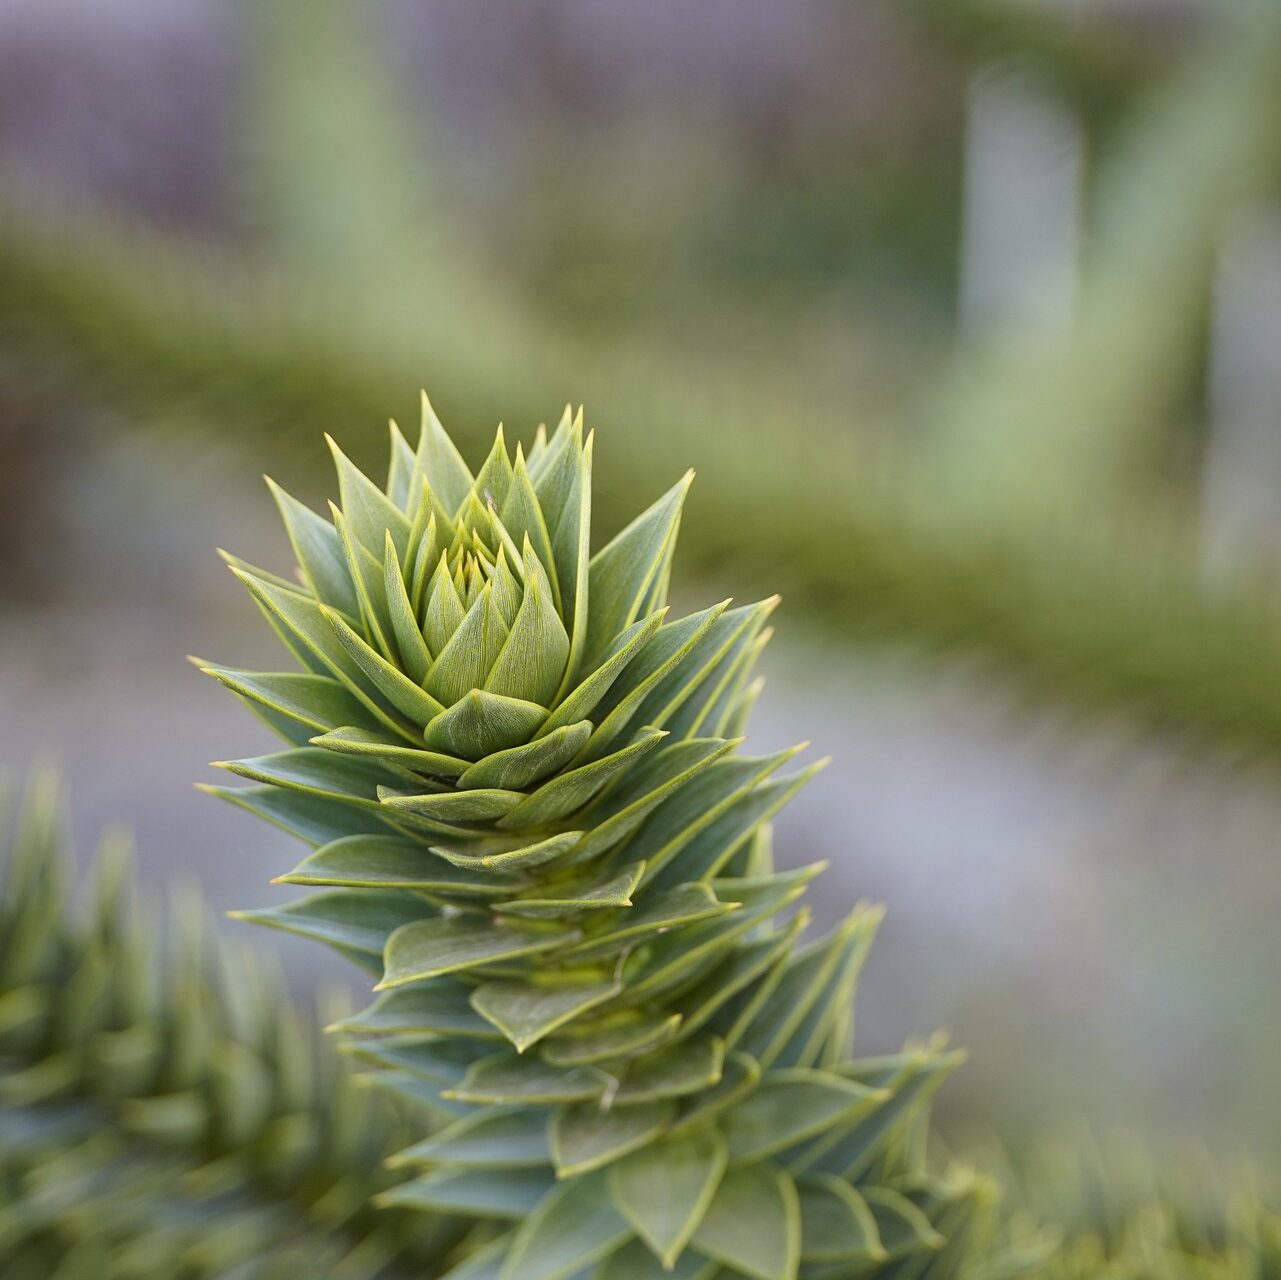 A close up of an araucaria tree branch in the Andes.